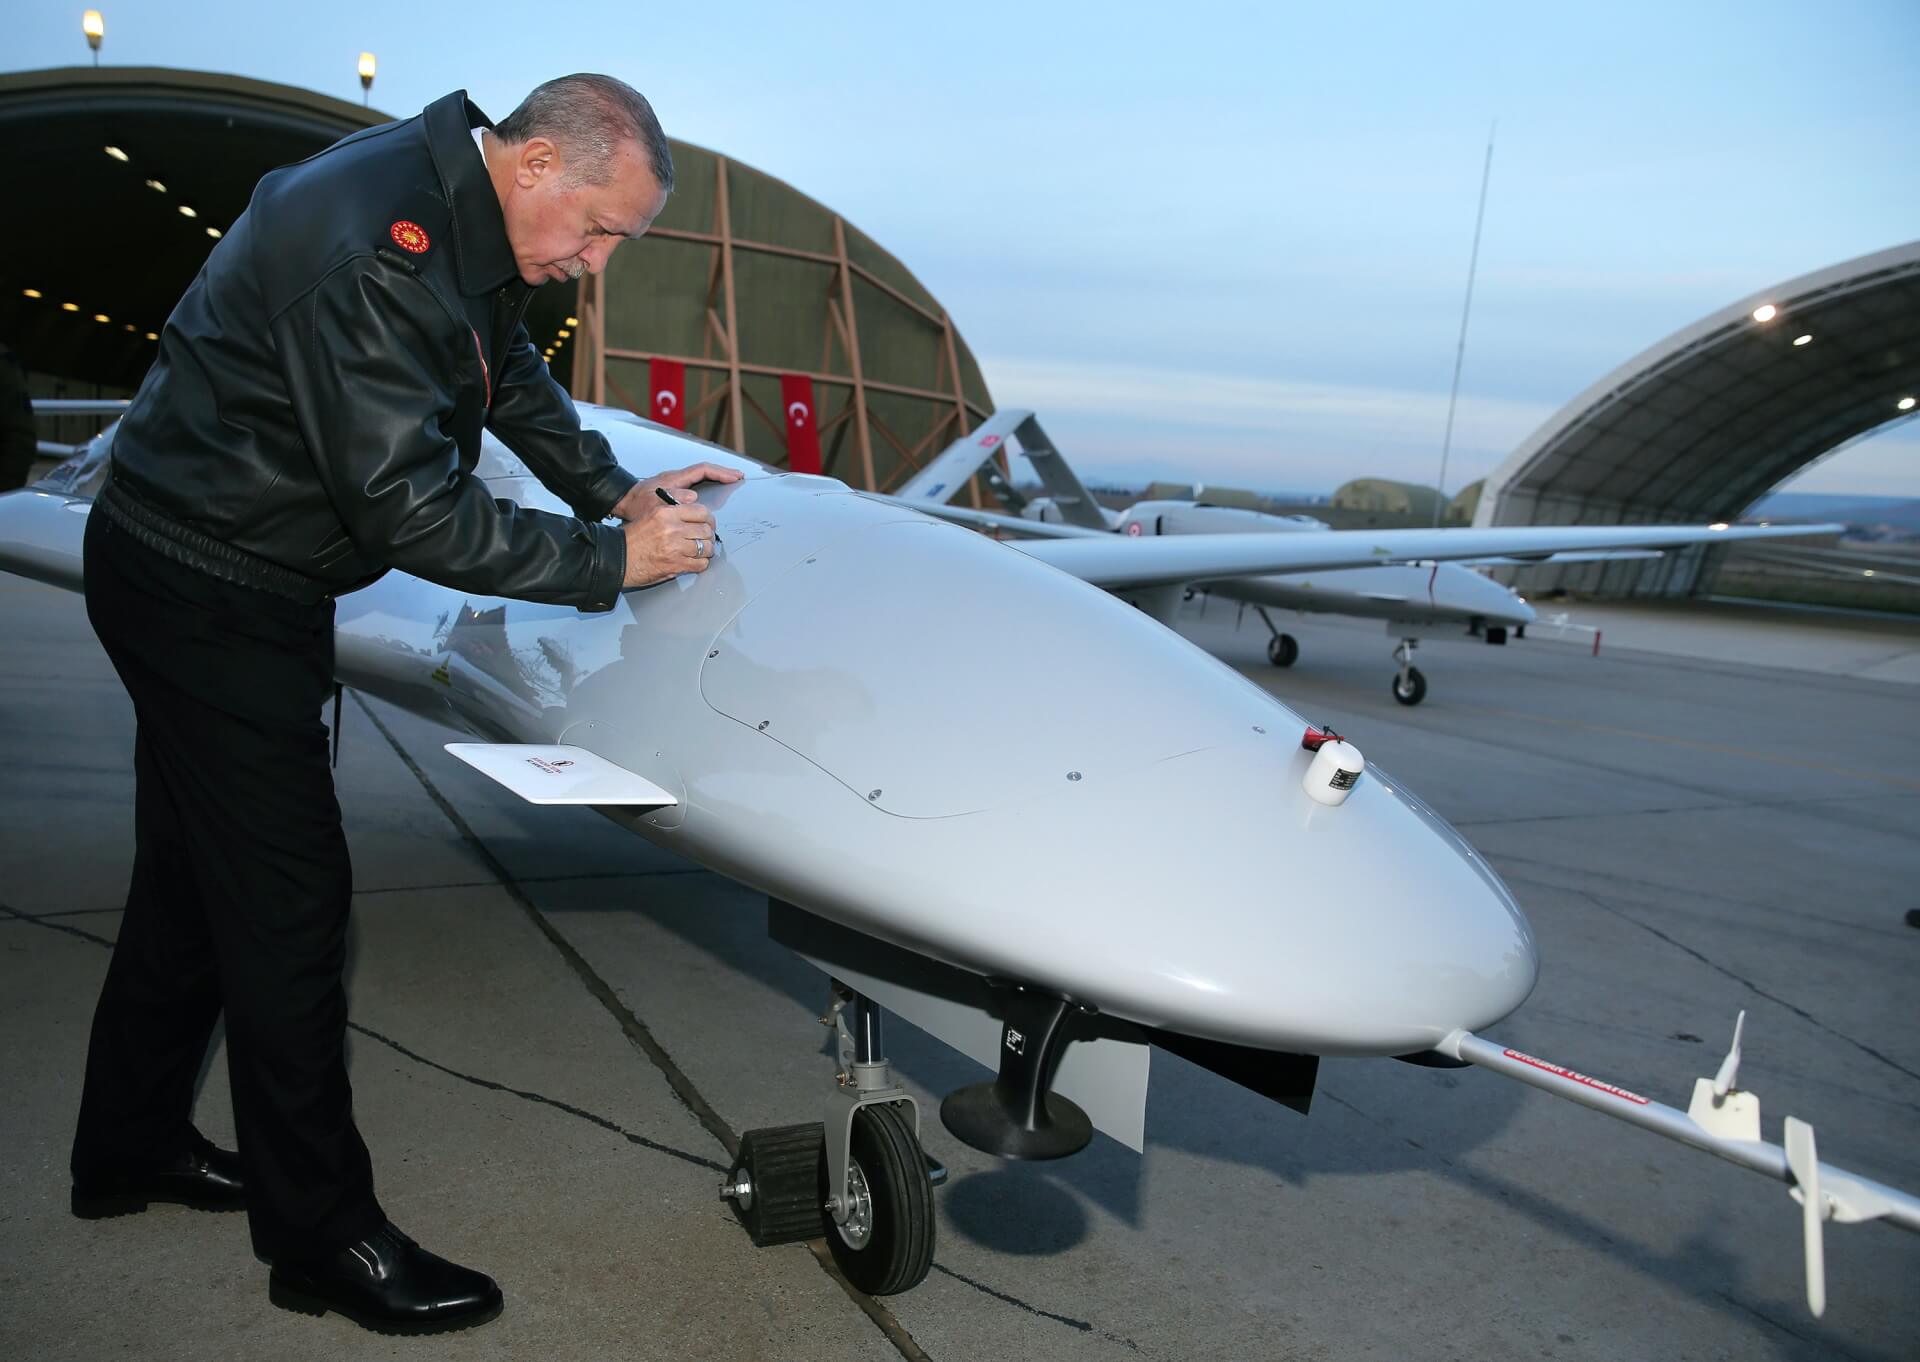 The Success of Turkey’s Drone Programme is a Product of US Sanctions